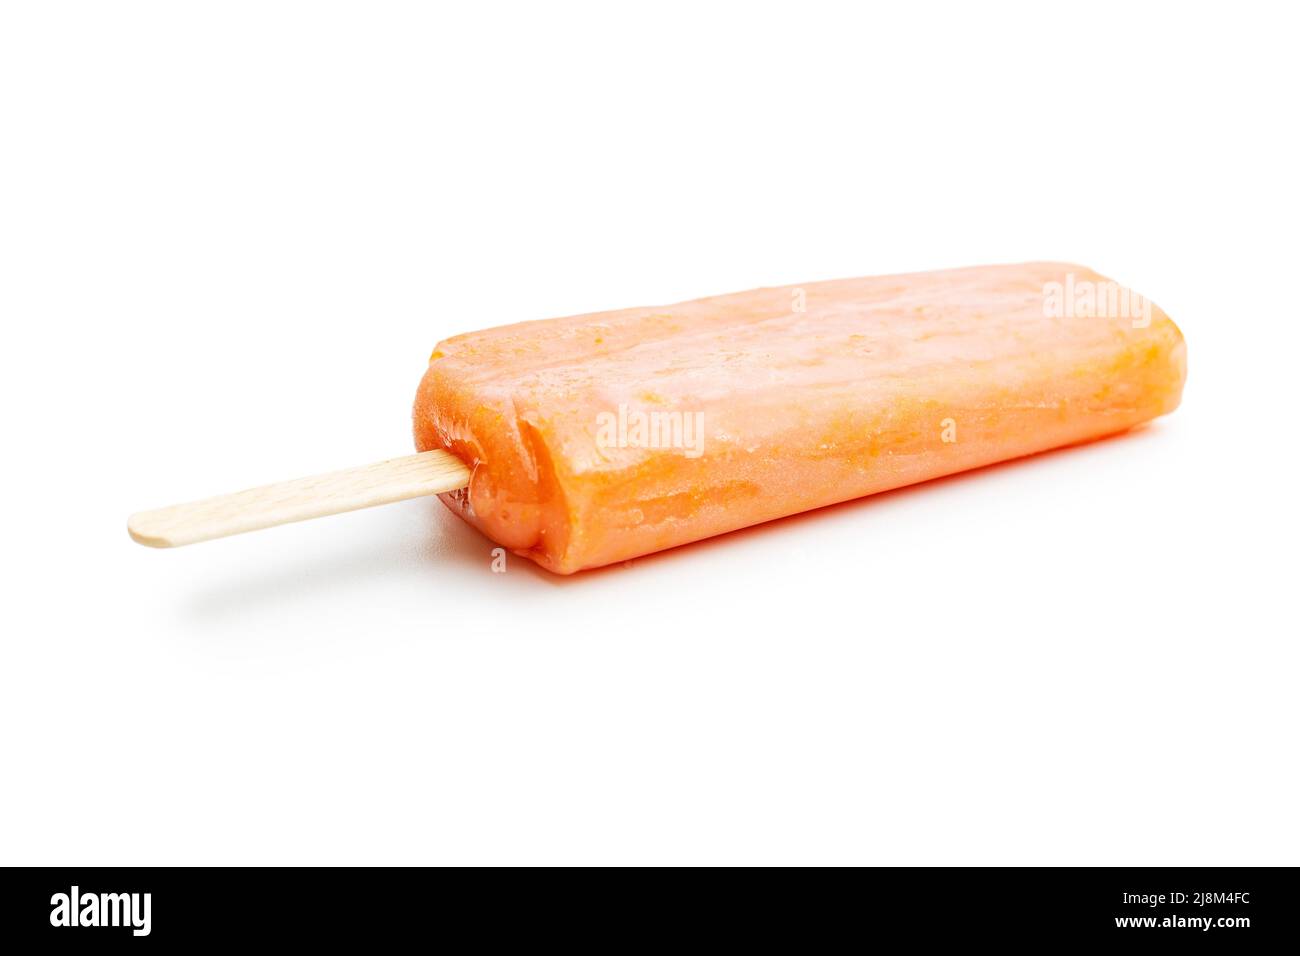 Fruity ice lolly. Sweet popsicle isolated on a white background. Stock Photo